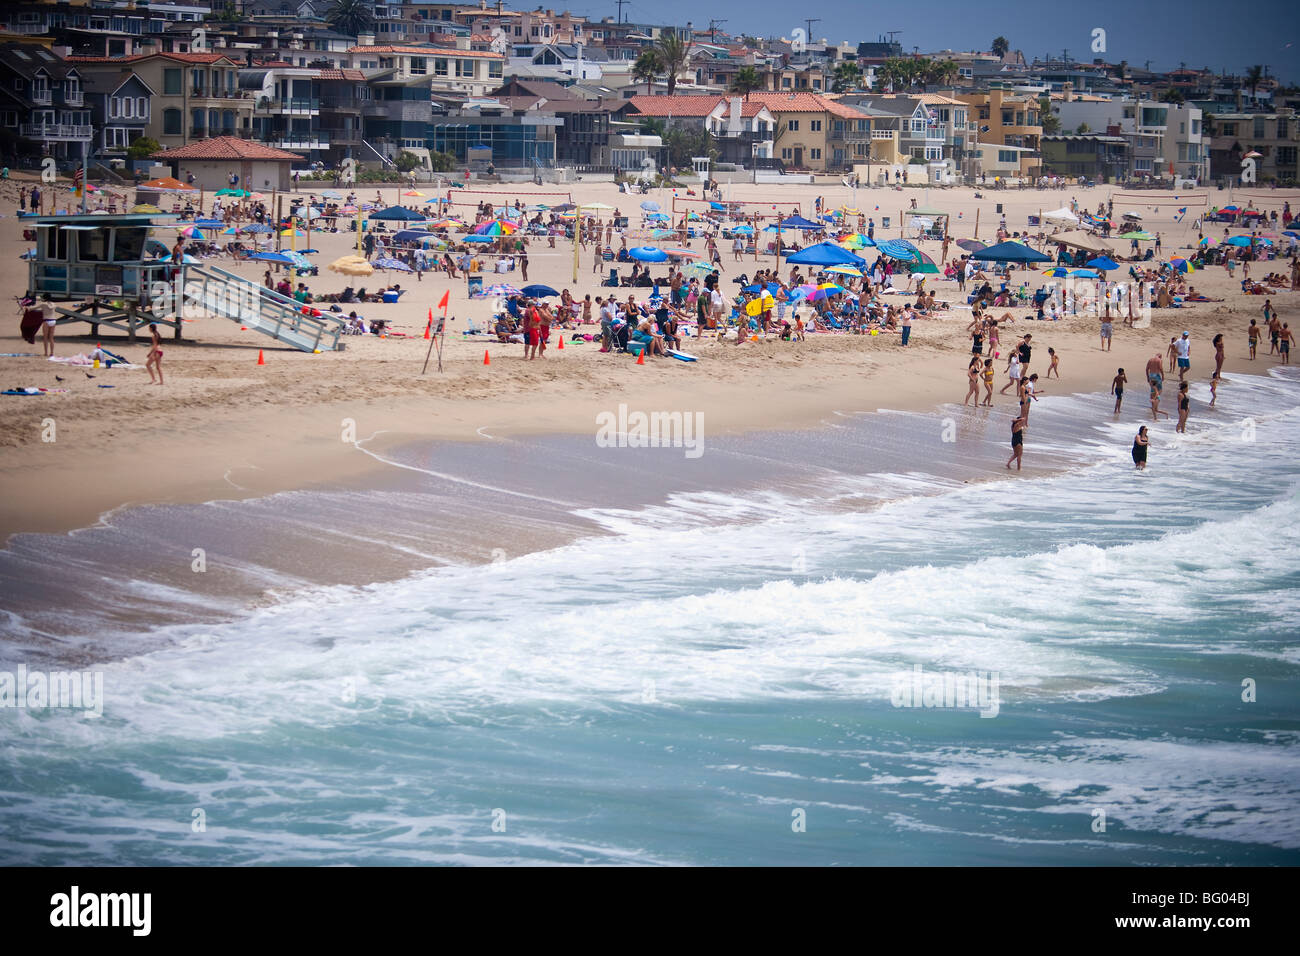 crowd of people during a hot day in Manhattan Beach, California, United States of America Stock Photo